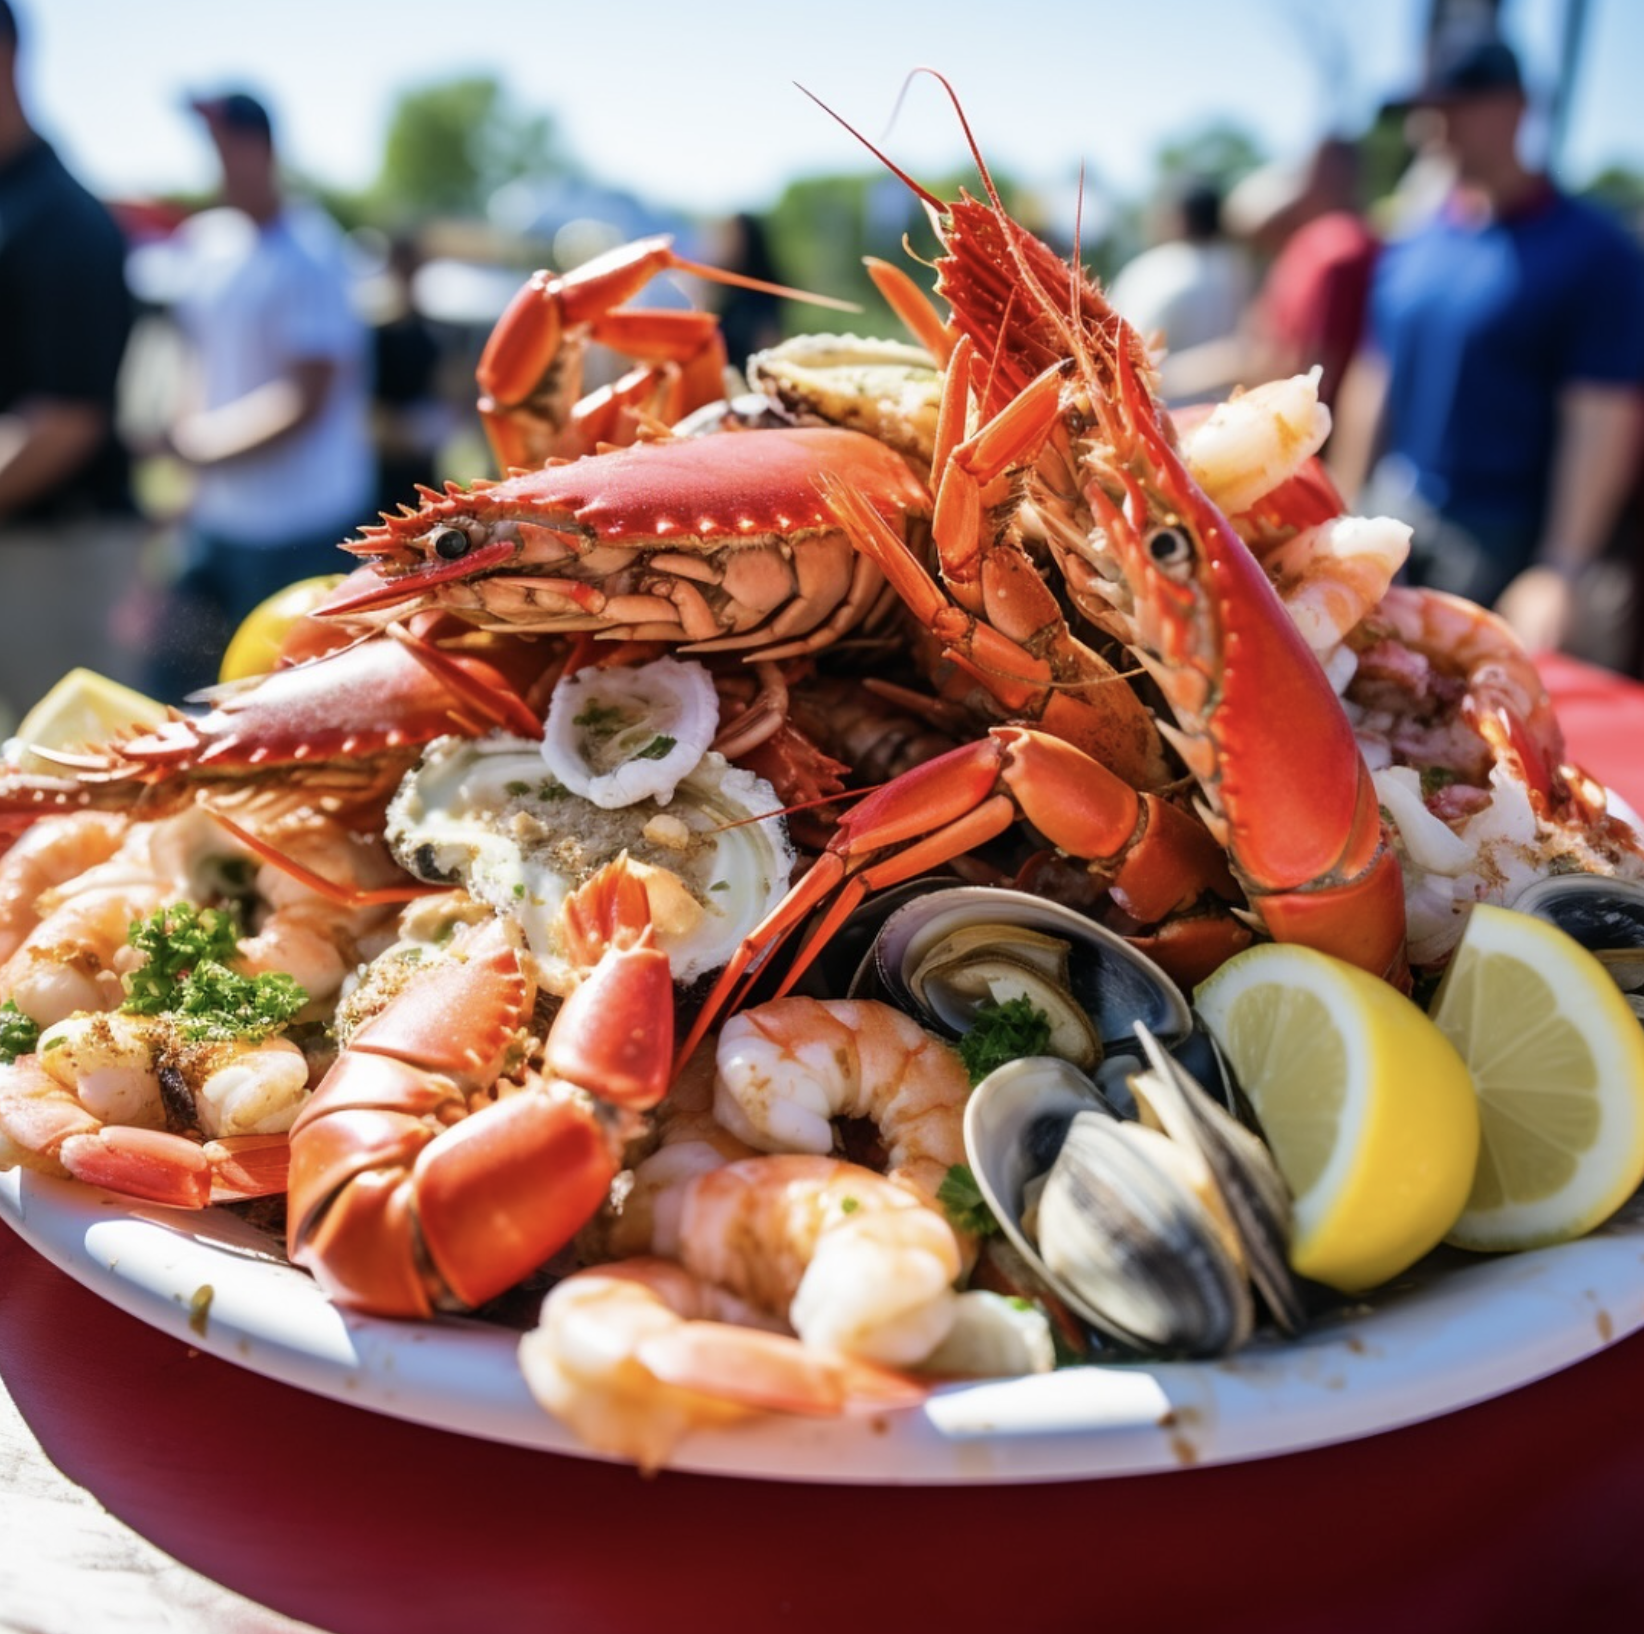 South Florida Seafood and Music Festival in Boca Raton